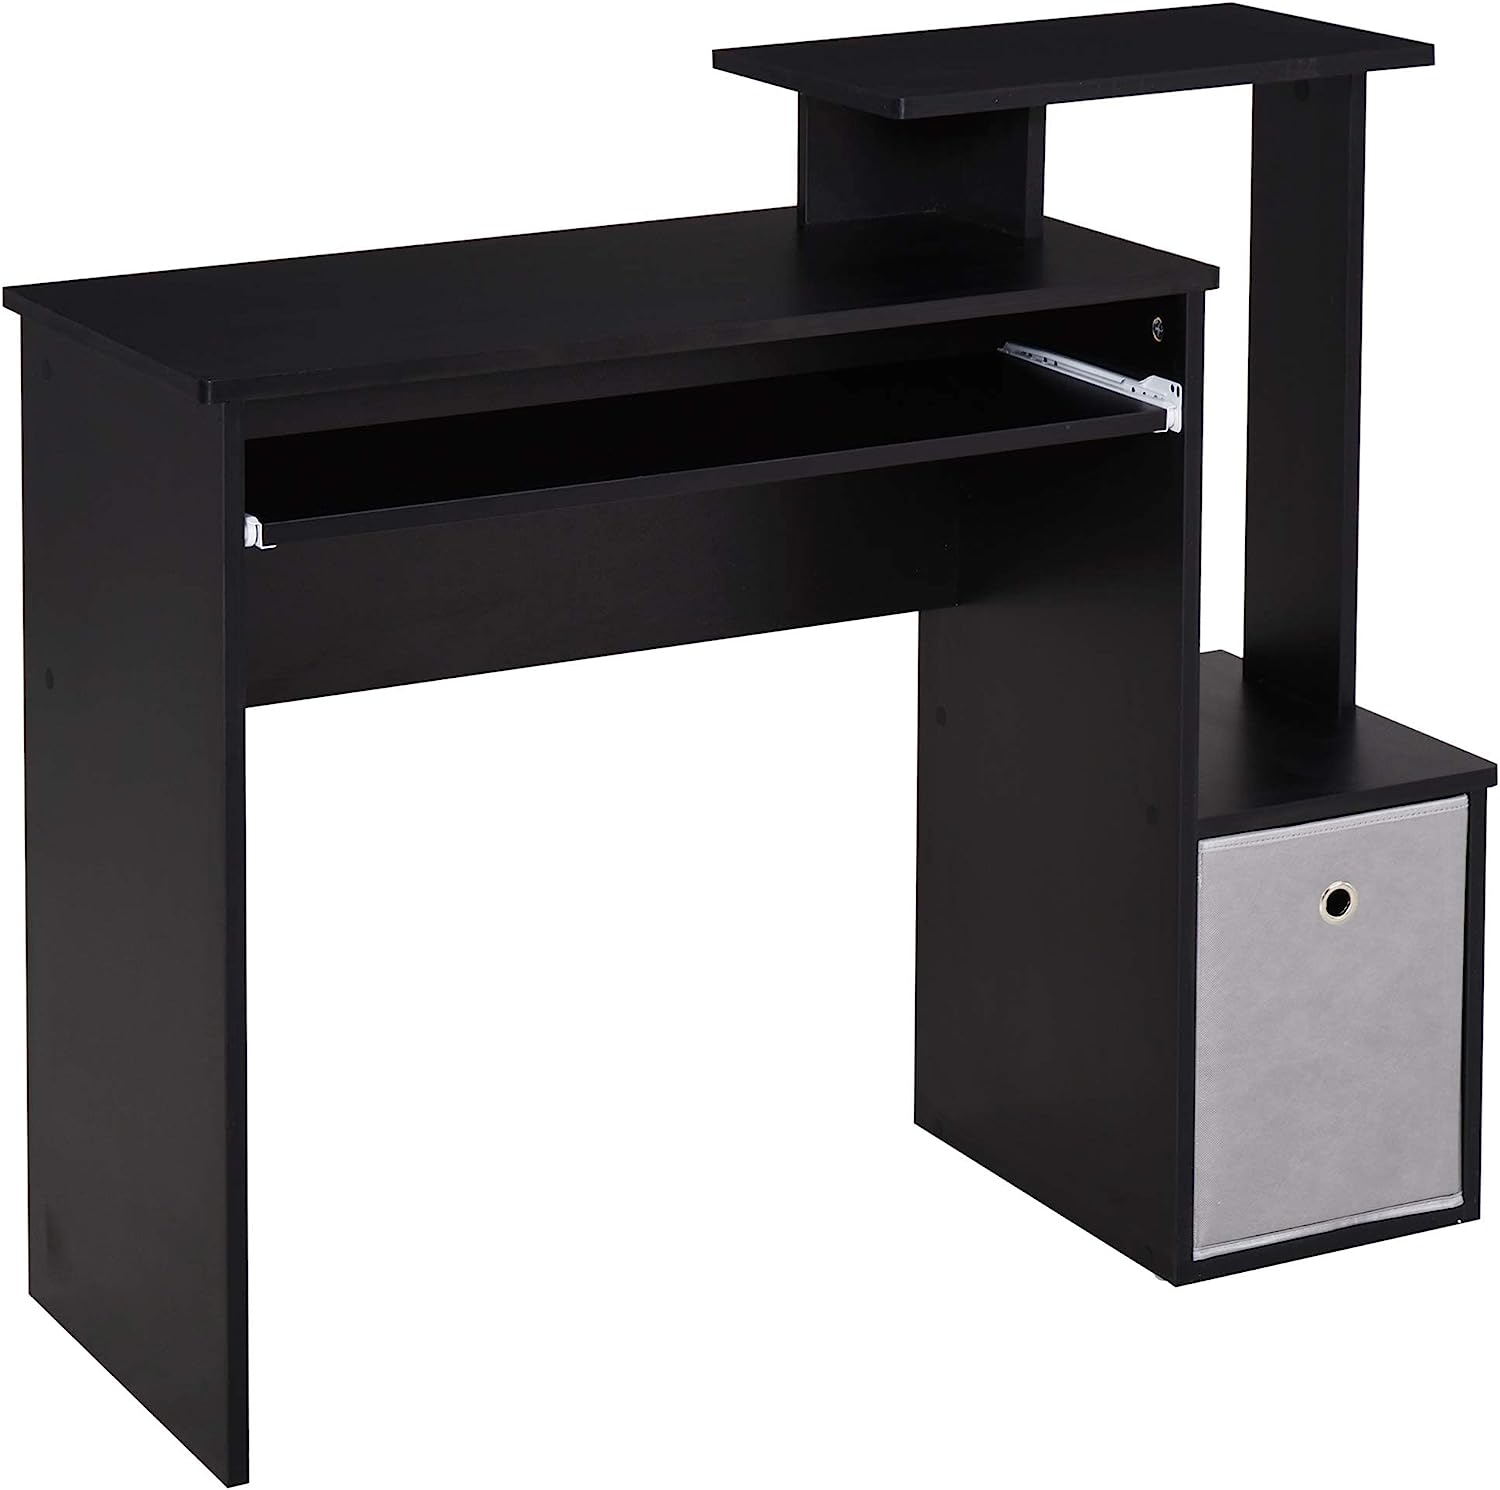 ProperAV Extra Computer Desk with Sliding Keyboard Tray & Side Compartment (Black)